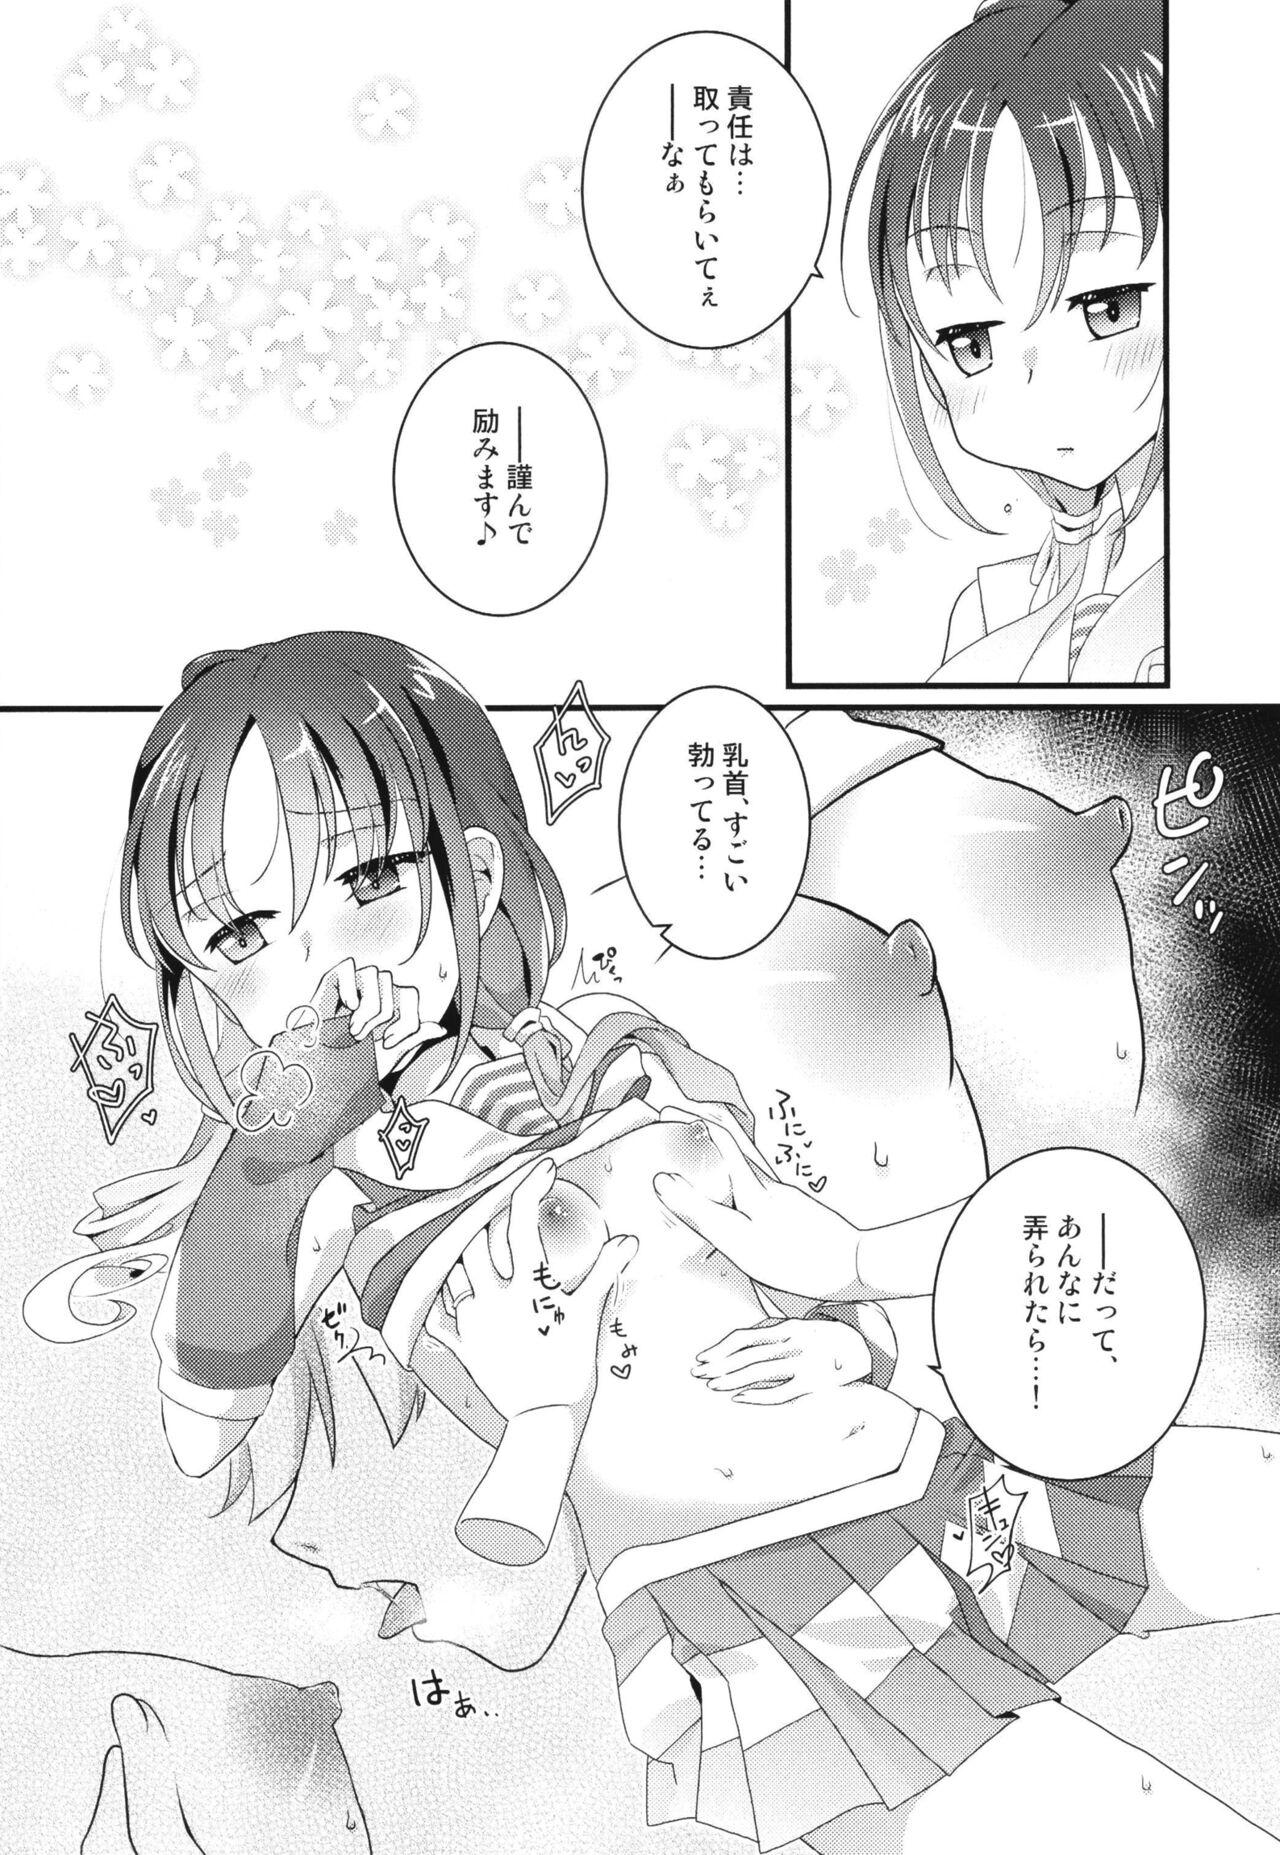 Action Yah! Cheer! yeah! - Kantai collection Amateurs Gone Wild - Page 8